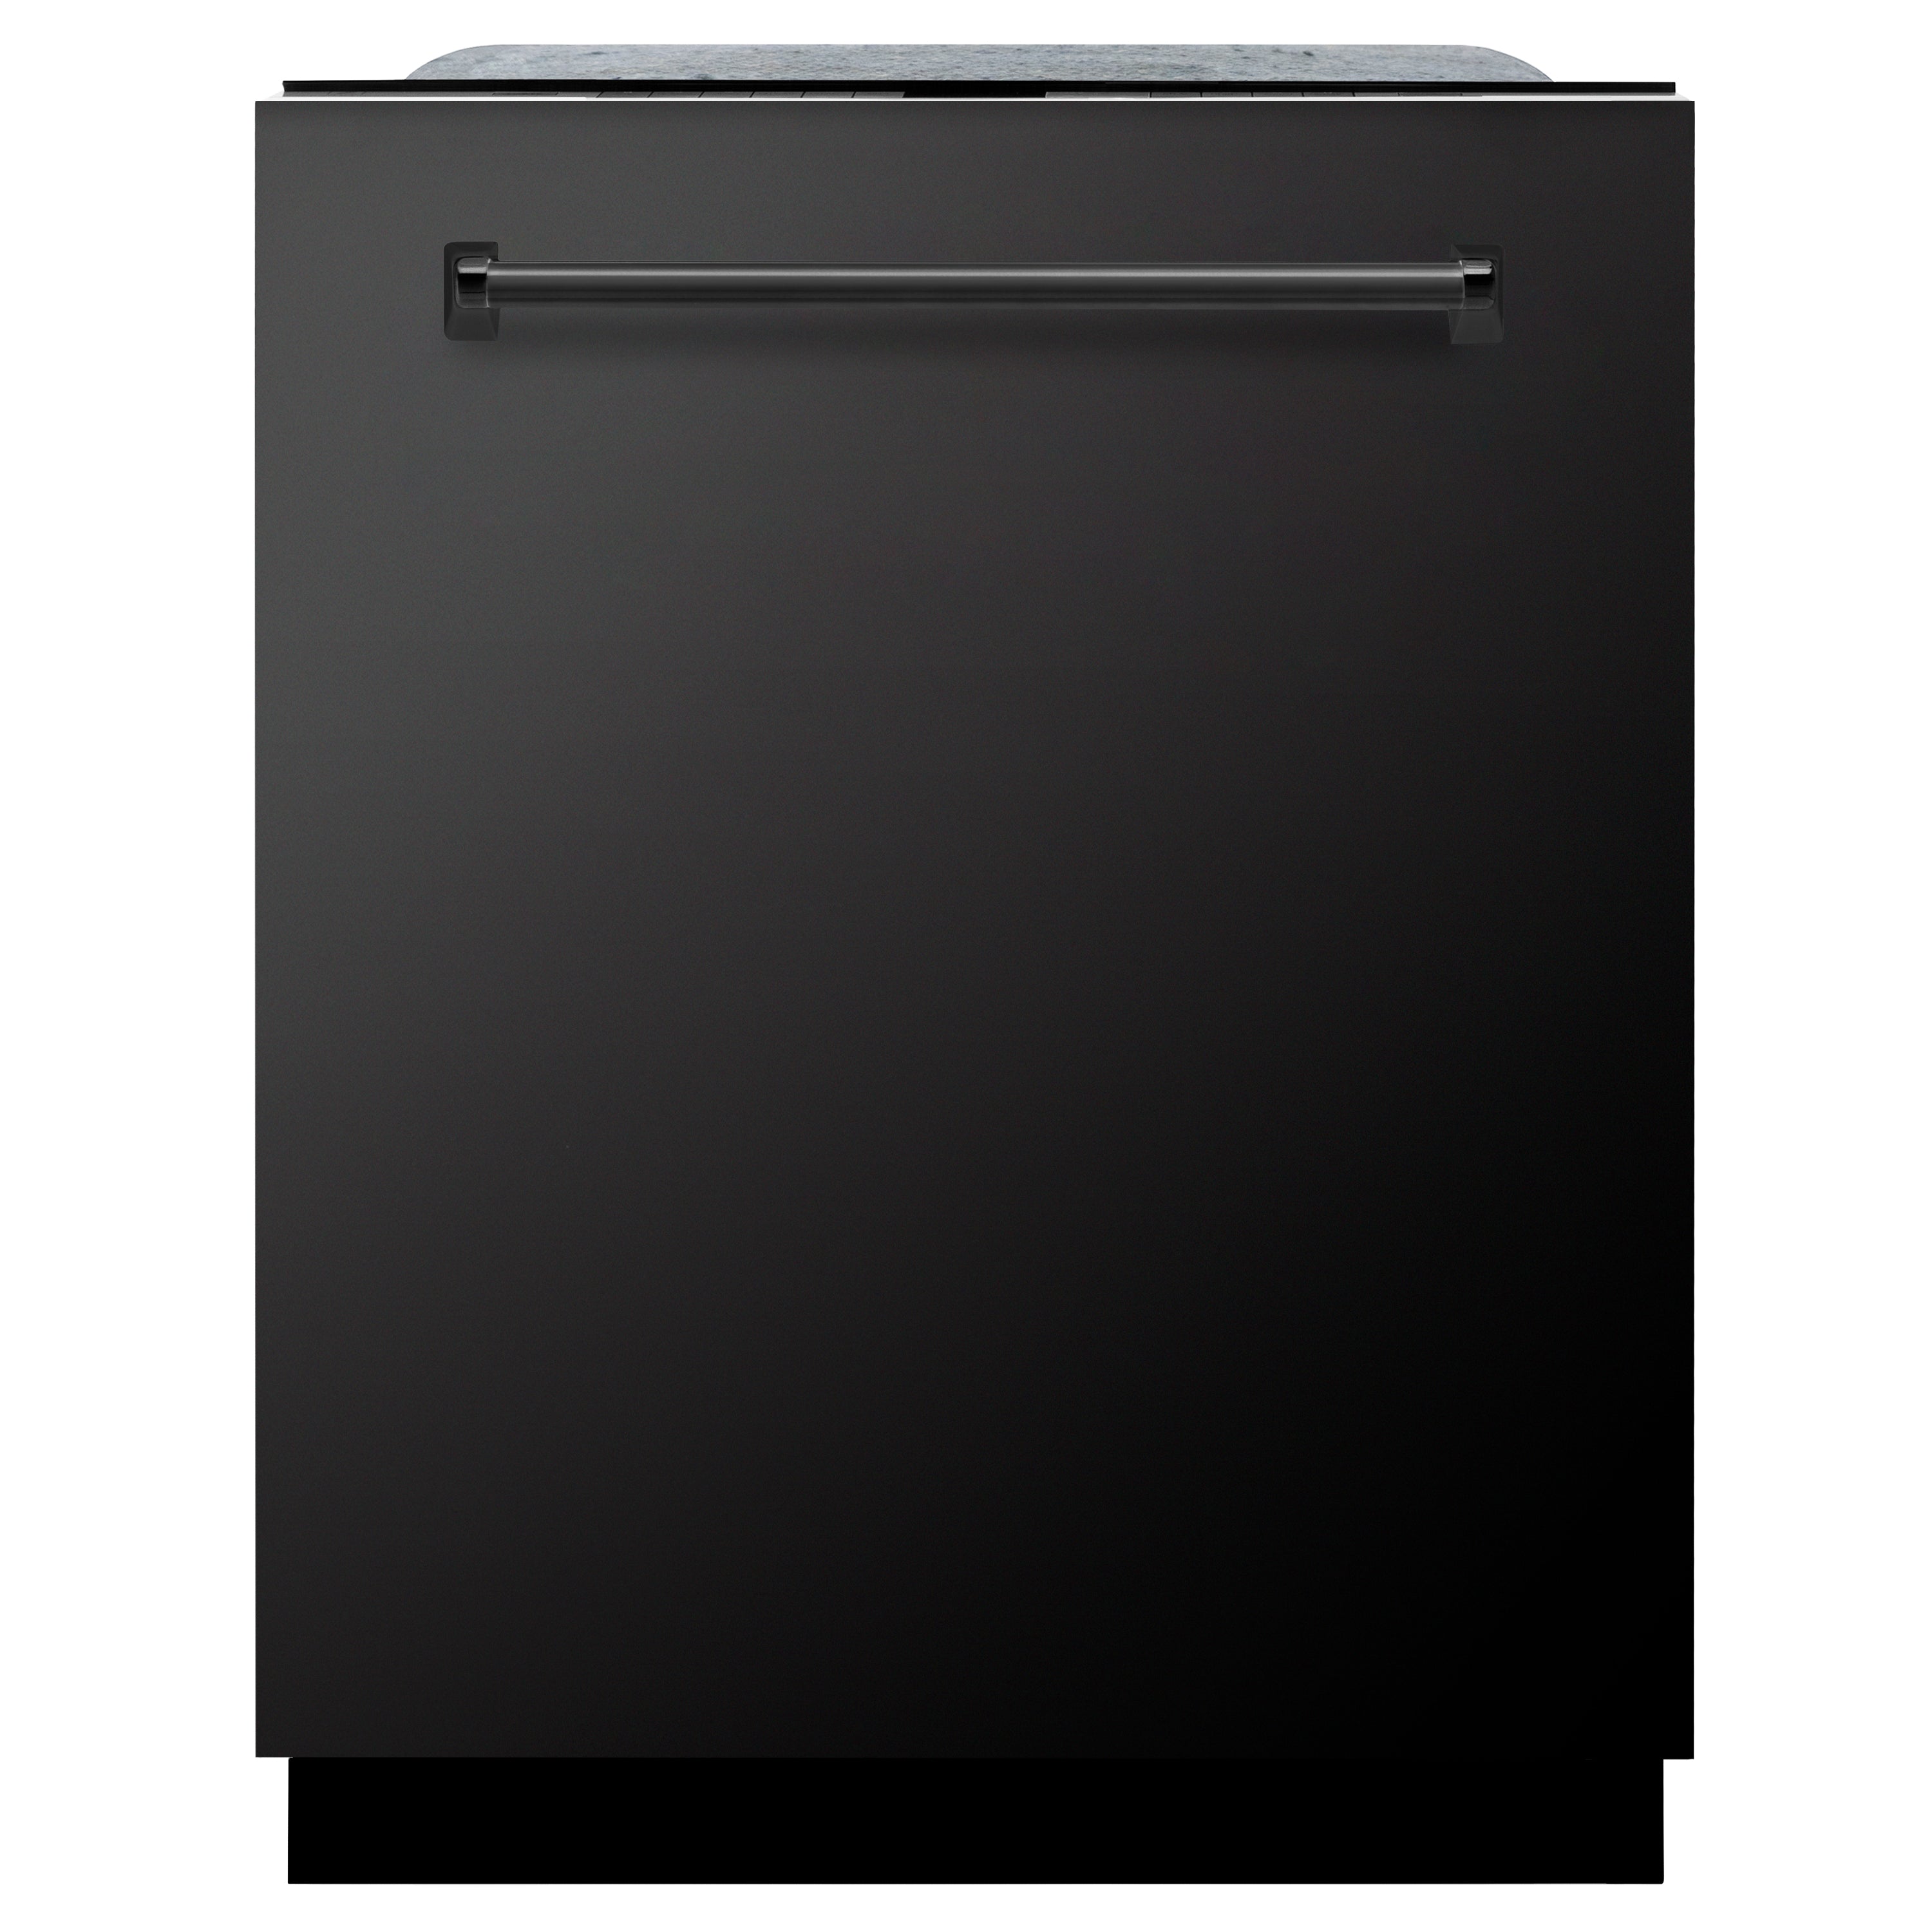 ZLINE 24" Monument Series 3rd Rack Top Touch Control Dishwasher with Stainless Steel Tub, 45dBa (DWMT-24) - New Star Living